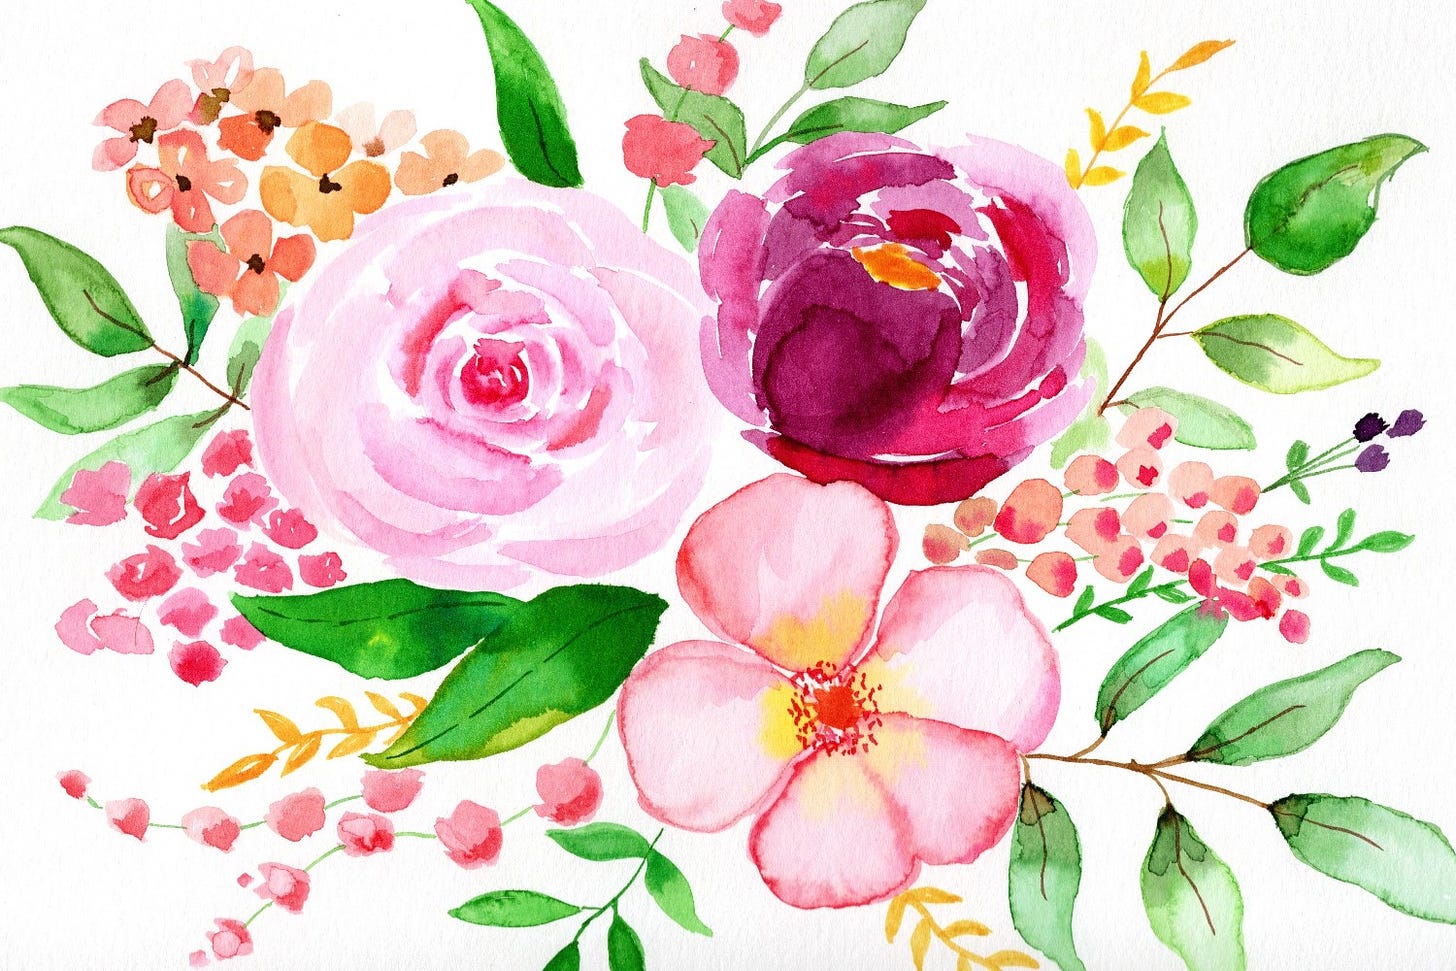 A bouquet of pink flowers and green leaves in watercolor